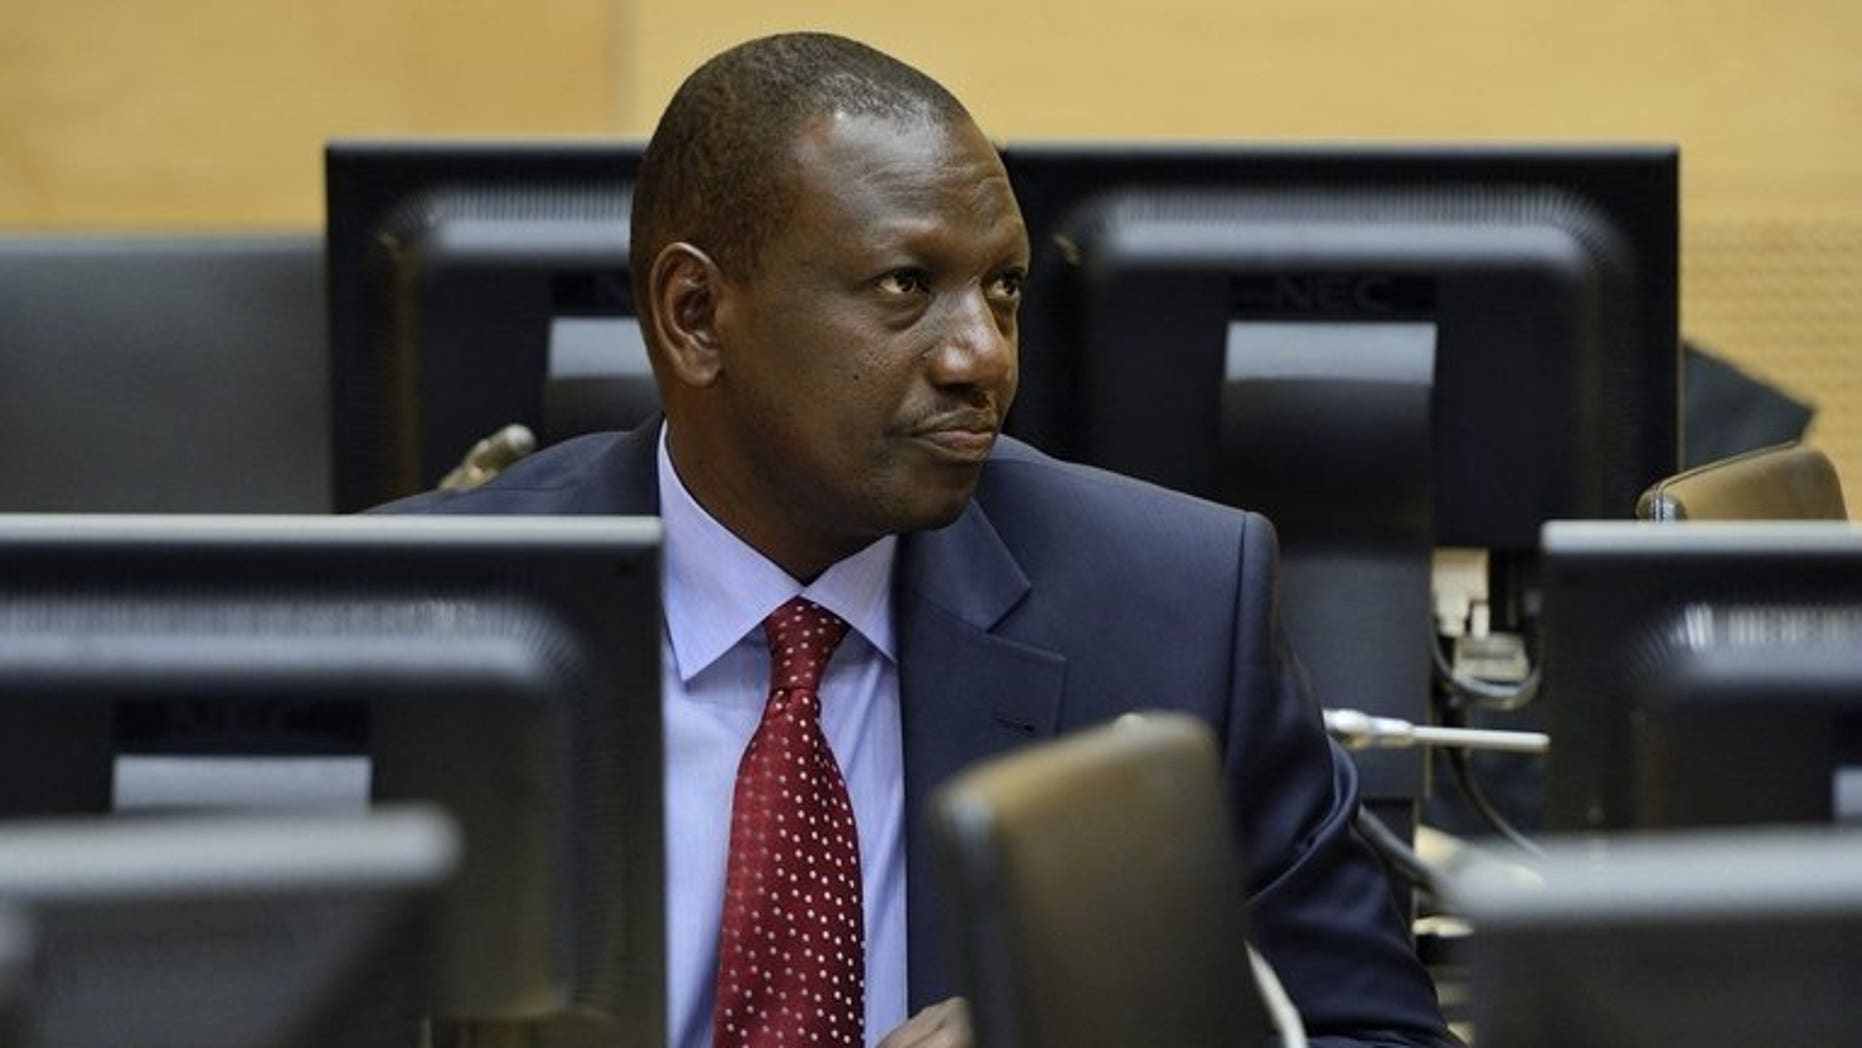 Kenya Vp Ruto To Go On Trial In The Hague Icc Fox News 